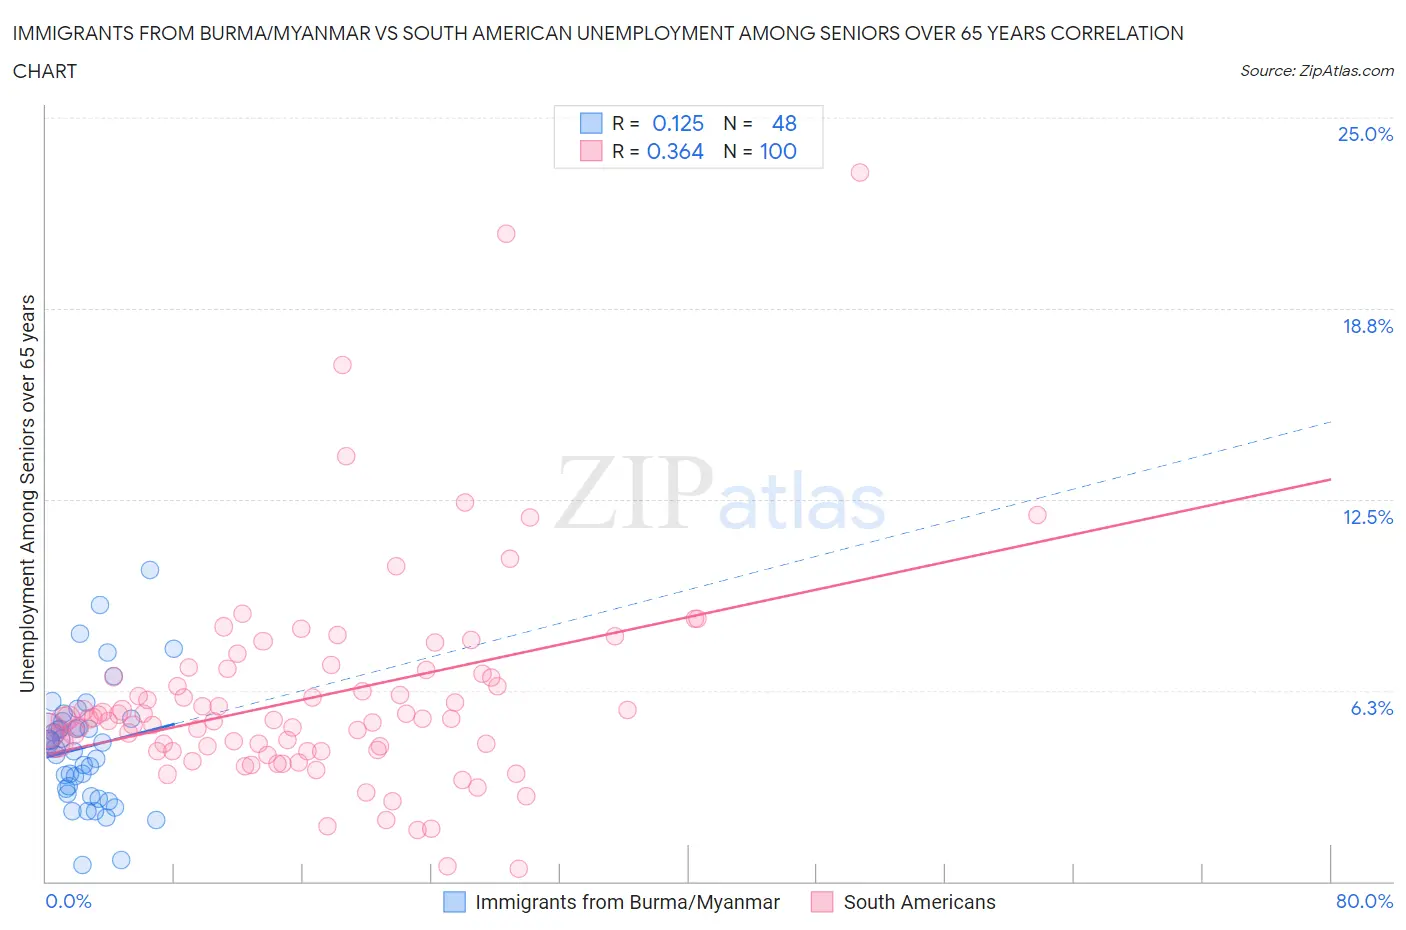 Immigrants from Burma/Myanmar vs South American Unemployment Among Seniors over 65 years